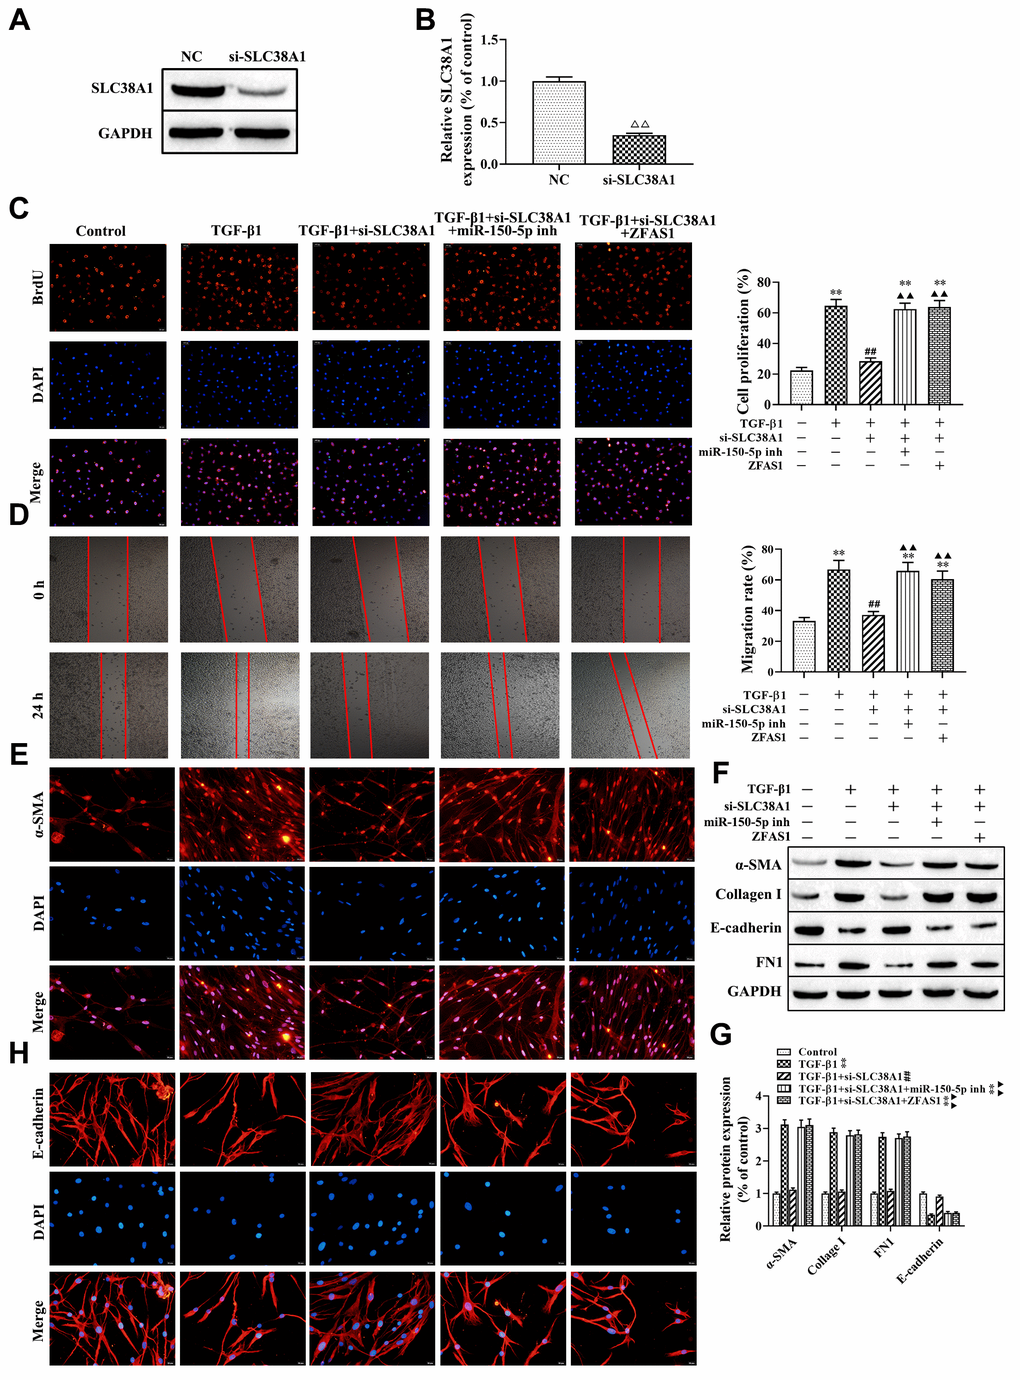 lncRNA ZFAS1 regulates FMT activation via the miR-150-5p/SLC38A1 axis in HFL1 cells. (A, B) Western blot was performed to detect the expression of SLC38A1 in HFL1 cells; (C) BrdU staining was applied to analyze cell viability; (D) Wound healing assay was used to detect the migration of HFL1 cells; (E, H) The expression levels of α-SMA and E-cadherin in HFL1 cells were measured by immunofluorescence staining; (F, G) Western blot was performed to detect the expression levels of E-cadherin, collagen I, FN1 and α-SMA. ΔΔP**P##P▲▲P